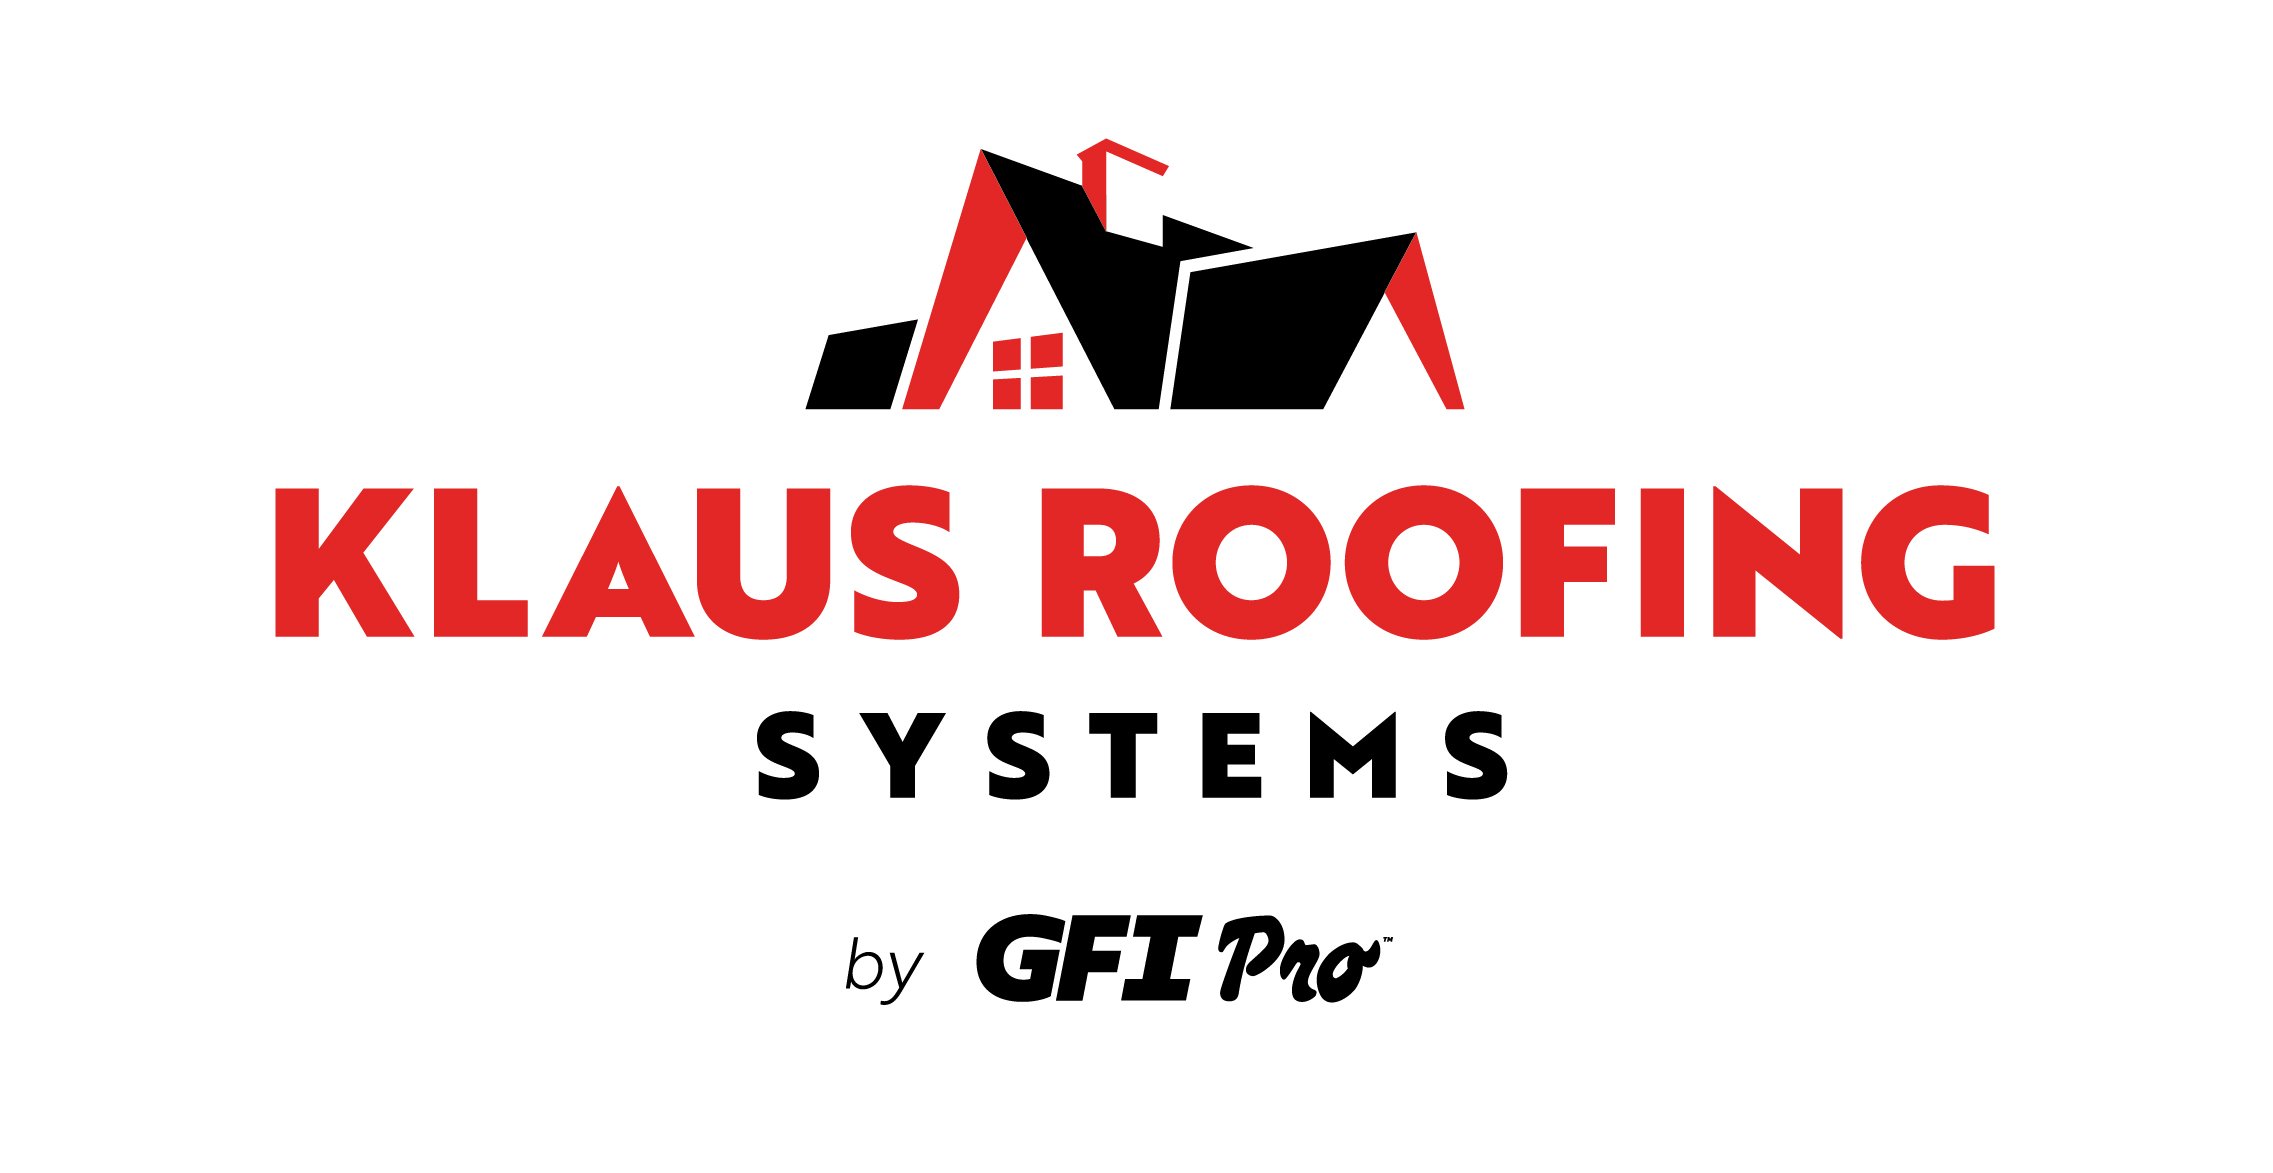 Klaus Roofing Systems by GFI Pro, LLC Logo